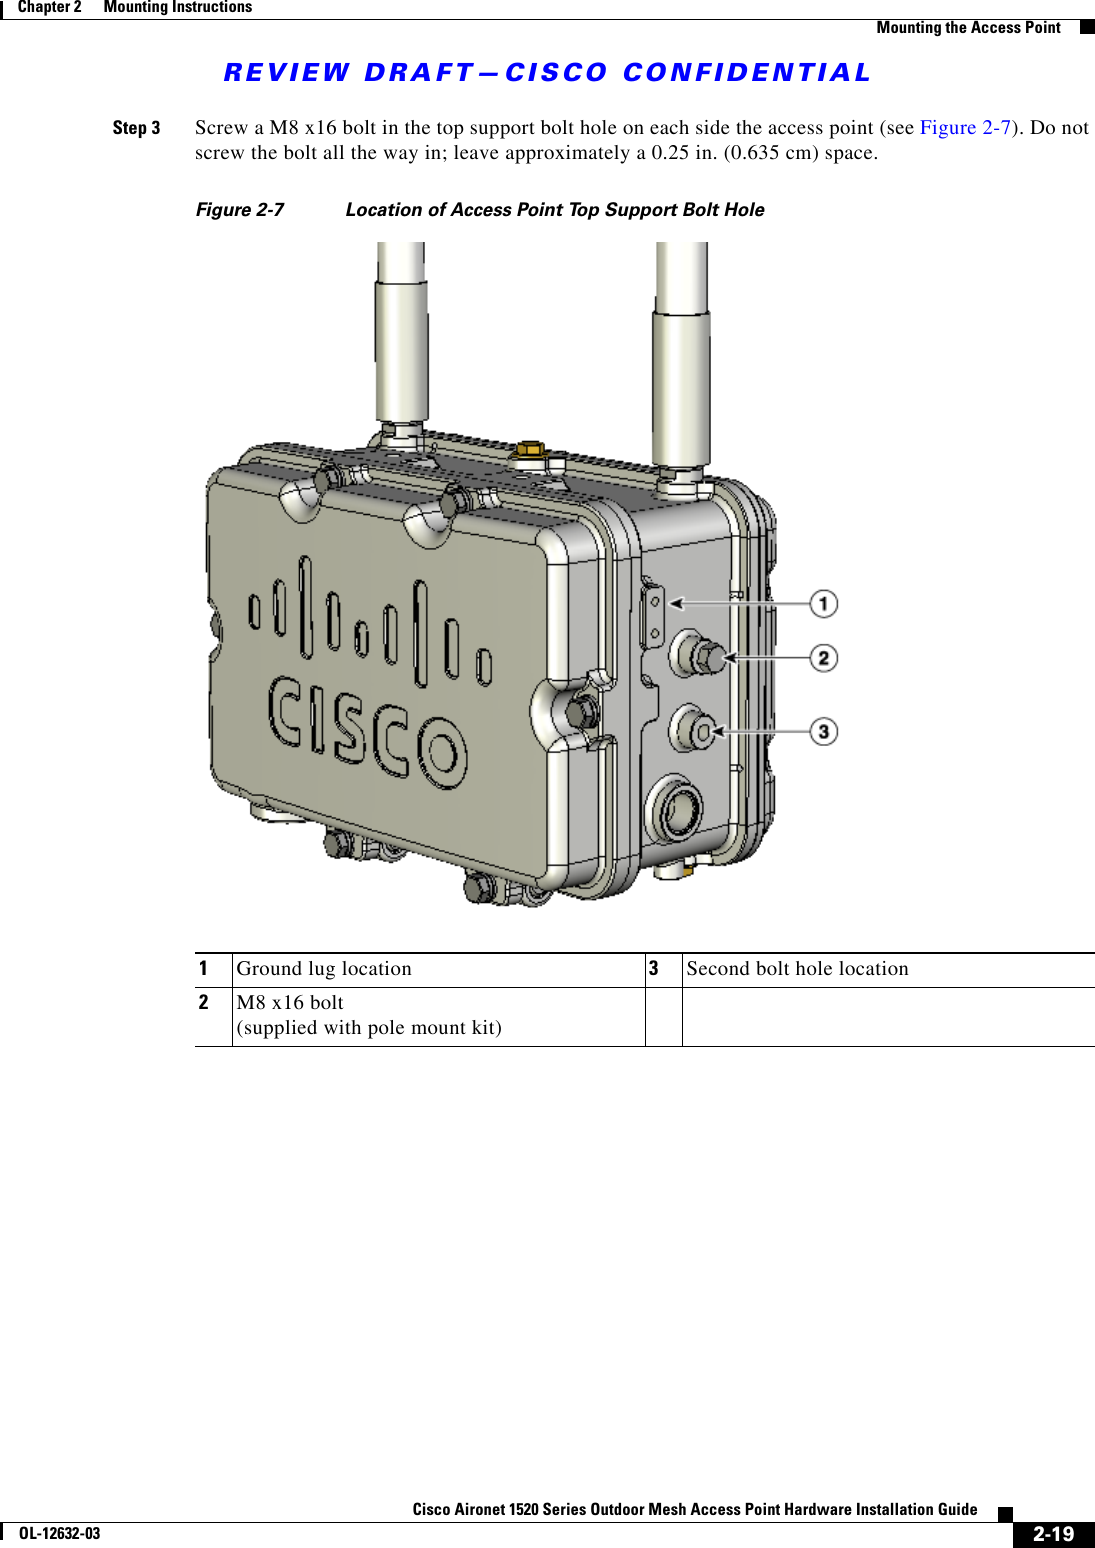 REVIEW DRAFT—CISCO CONFIDENTIAL2-19Cisco Aironet 1520 Series Outdoor Mesh Access Point Hardware Installation GuideOL-12632-03Chapter 2      Mounting Instructions  Mounting the Access PointStep 3 Screw a M8 x16 bolt in the top support bolt hole on each side the access point (see Figure 2-7). Do not screw the bolt all the way in; leave approximately a 0.25 in. (0.635 cm) space.Figure 2-7 Location of Access Point Top Support Bolt Hole1Ground lug location 3Second bolt hole location2M8 x16 bolt  (supplied with pole mount kit)